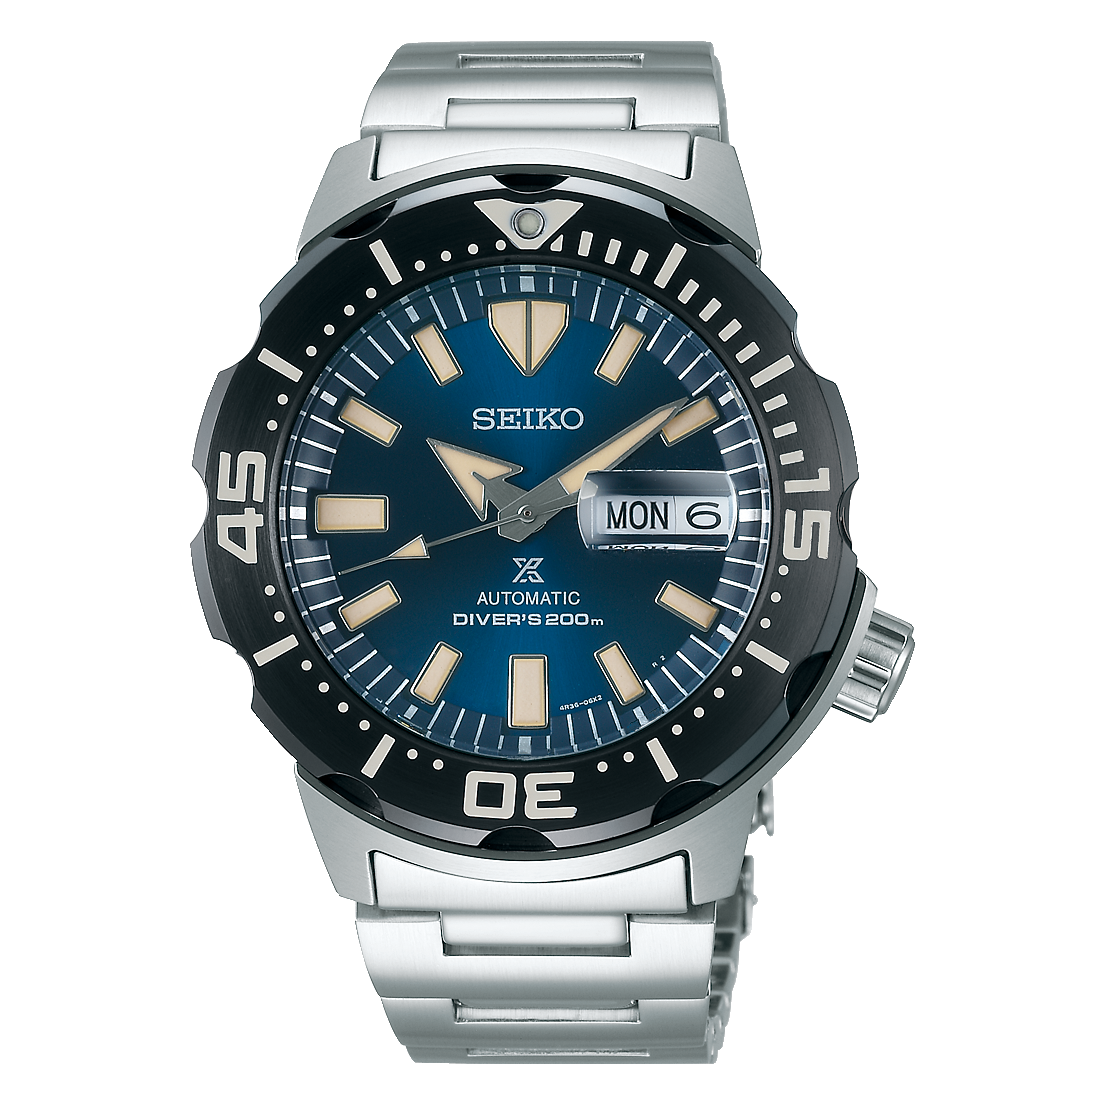 Seiko Prospex Monster Automatic Diver's Watch-SRPD25K1